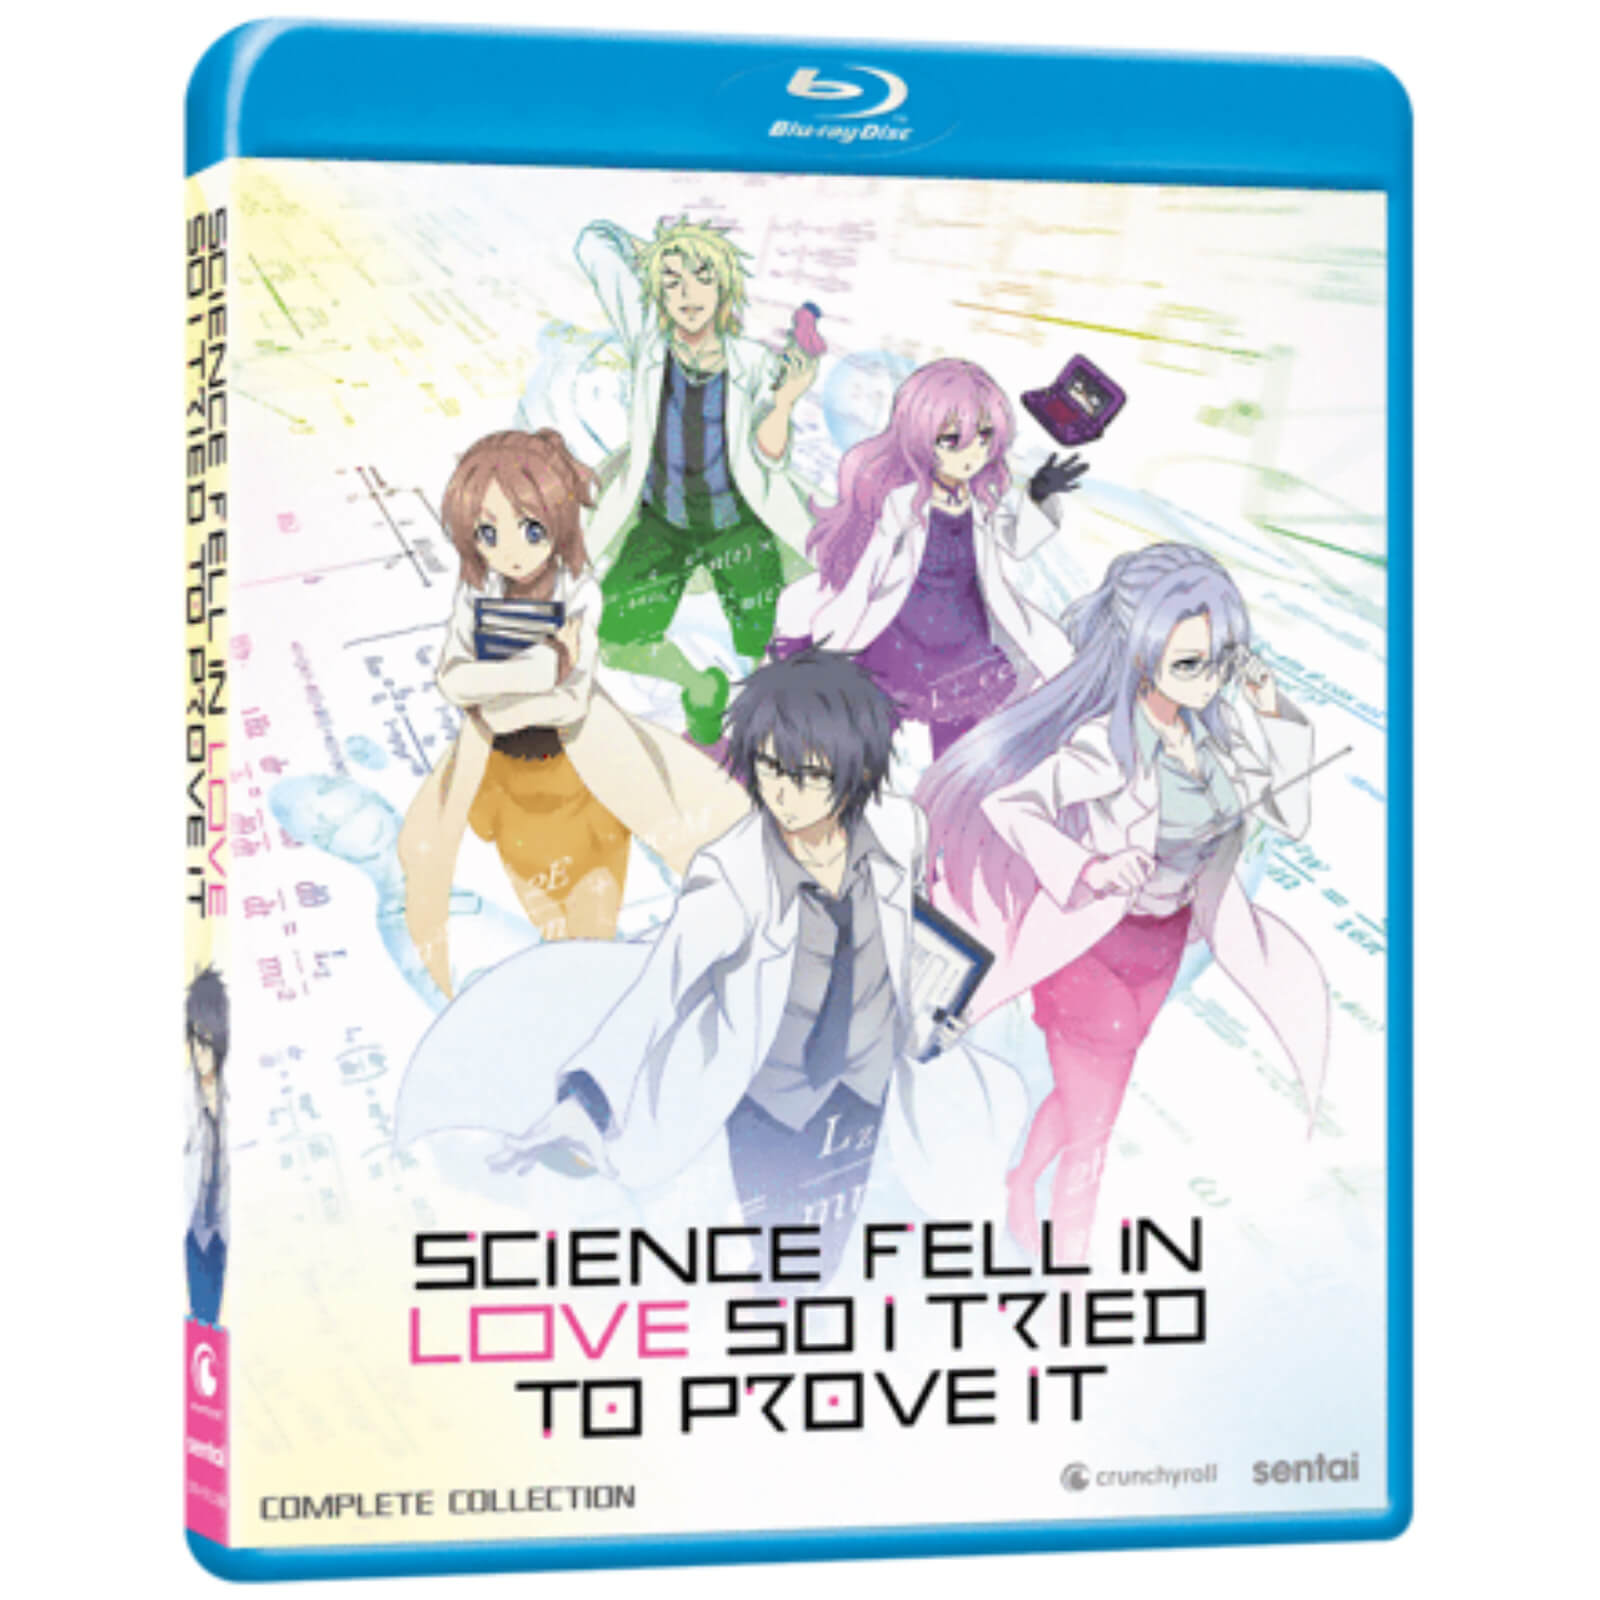 Science Fell In Love So I Tried To Prove It: Complete Collection (US Import)